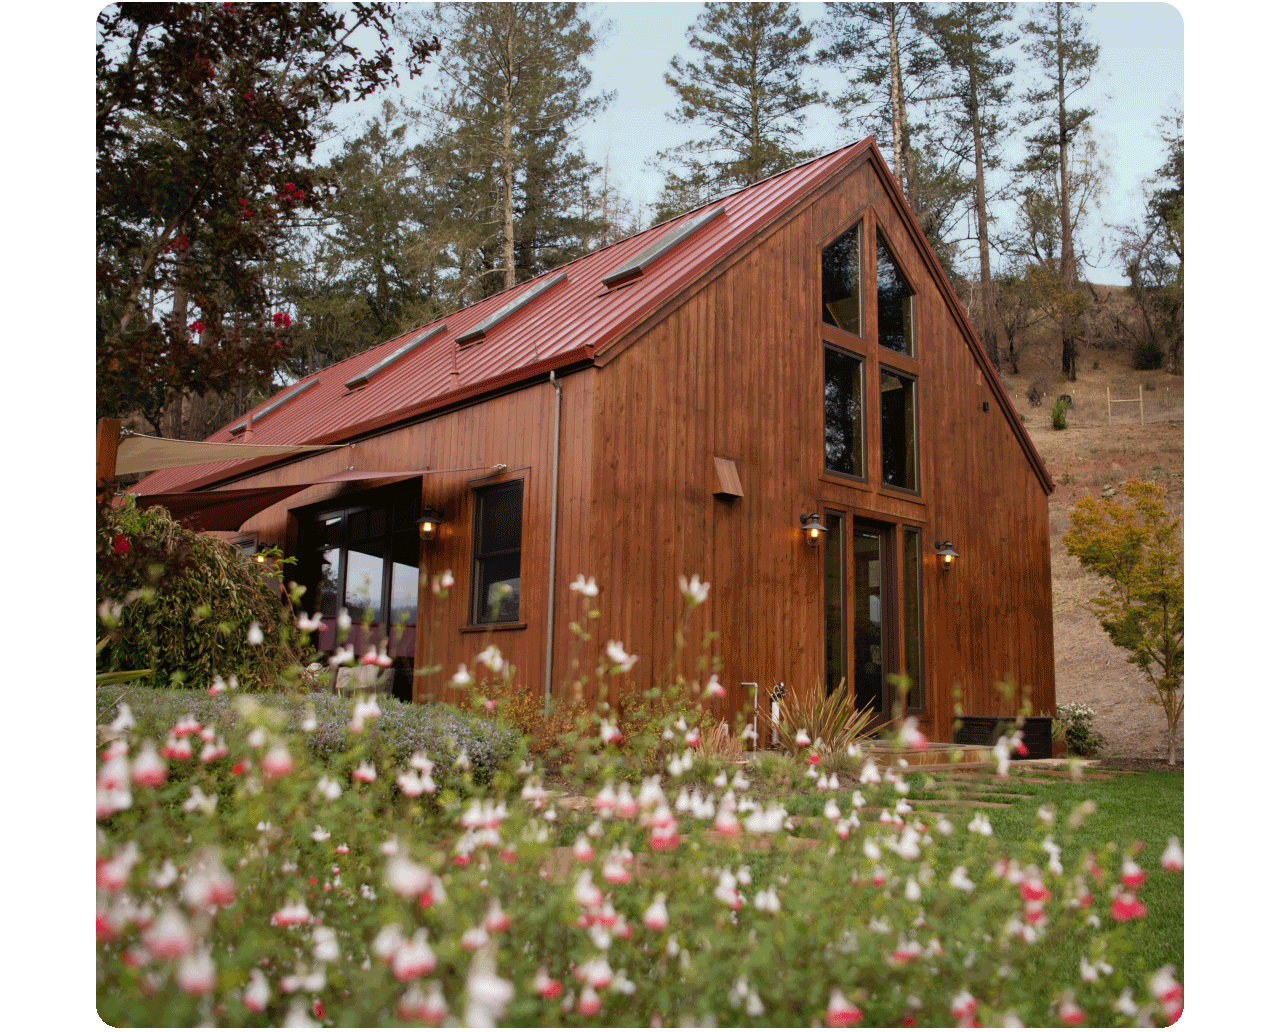 An animated .gif cycling through three images of a cabin near a field of wildflowers, a group of friends sharing a picnic on a blanket, and two women on a dock overlooking a lake.